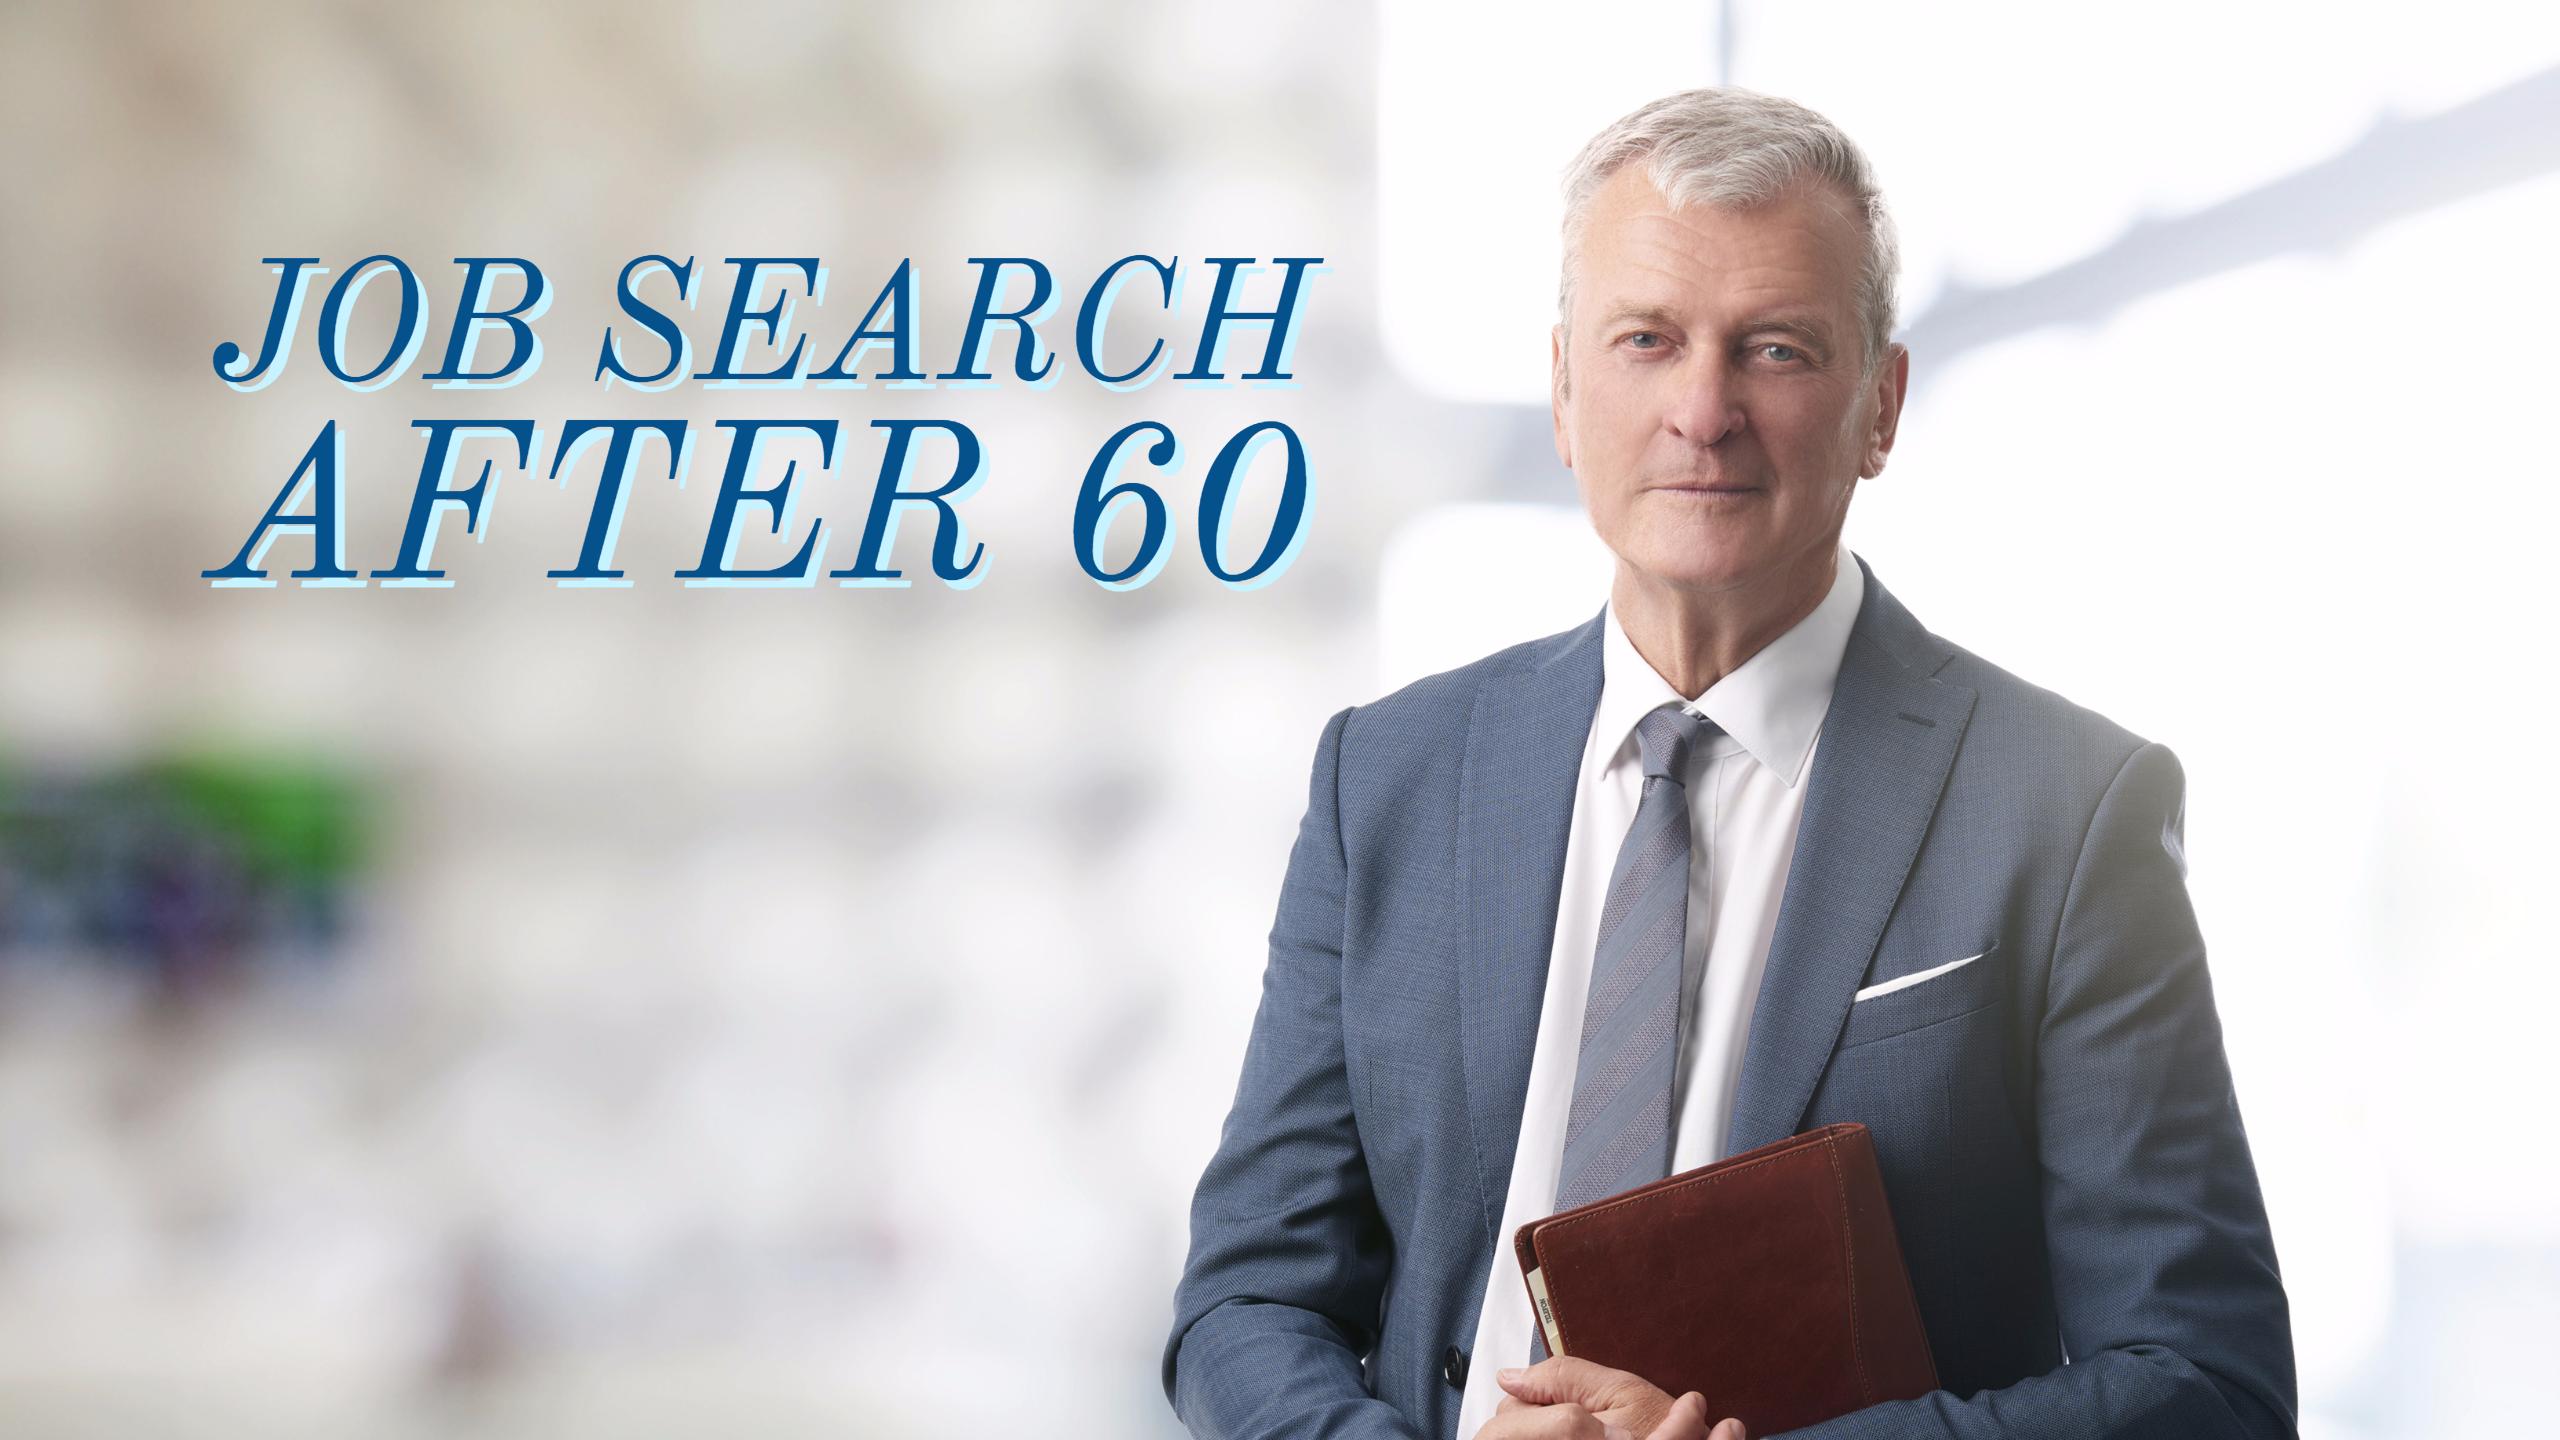 Job Search after 60